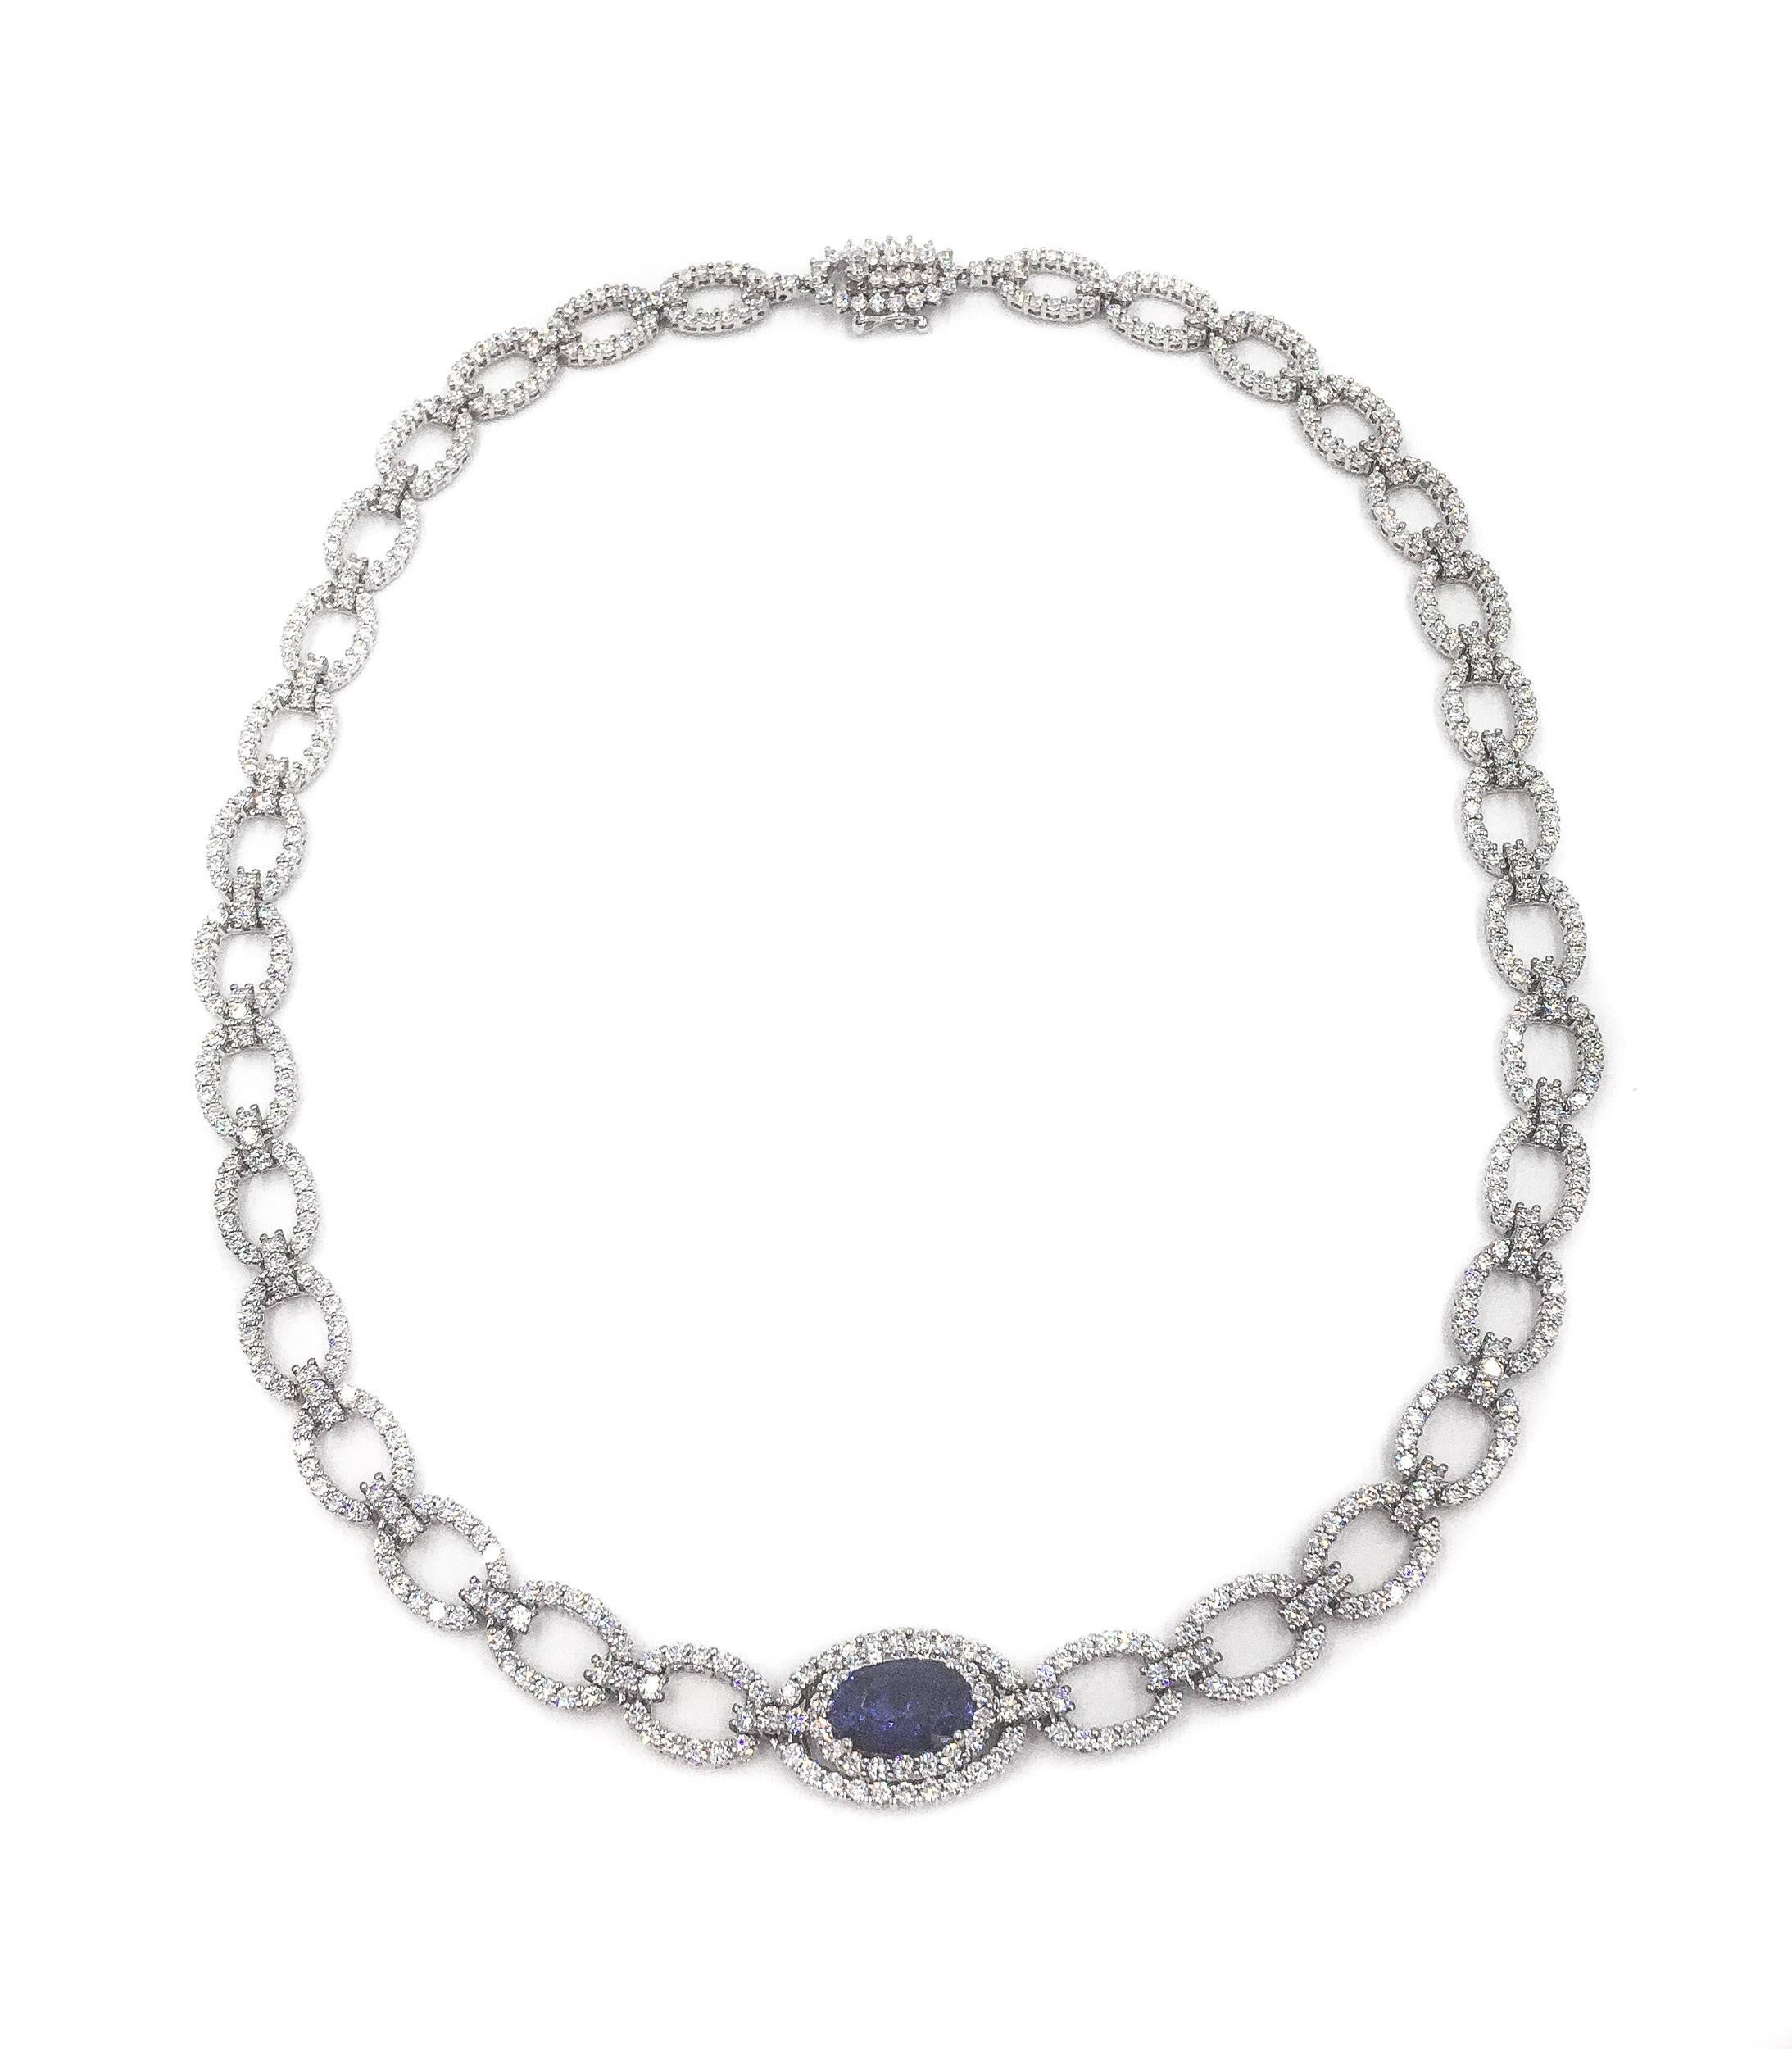 The enchanting oval sapphire is horizontally positioned in the center of this diamond necklace composed of a semi-rigid design of open oval links of round brilliant cut diamonds, together weighing approximately 10.72 carats, graded G-H color and